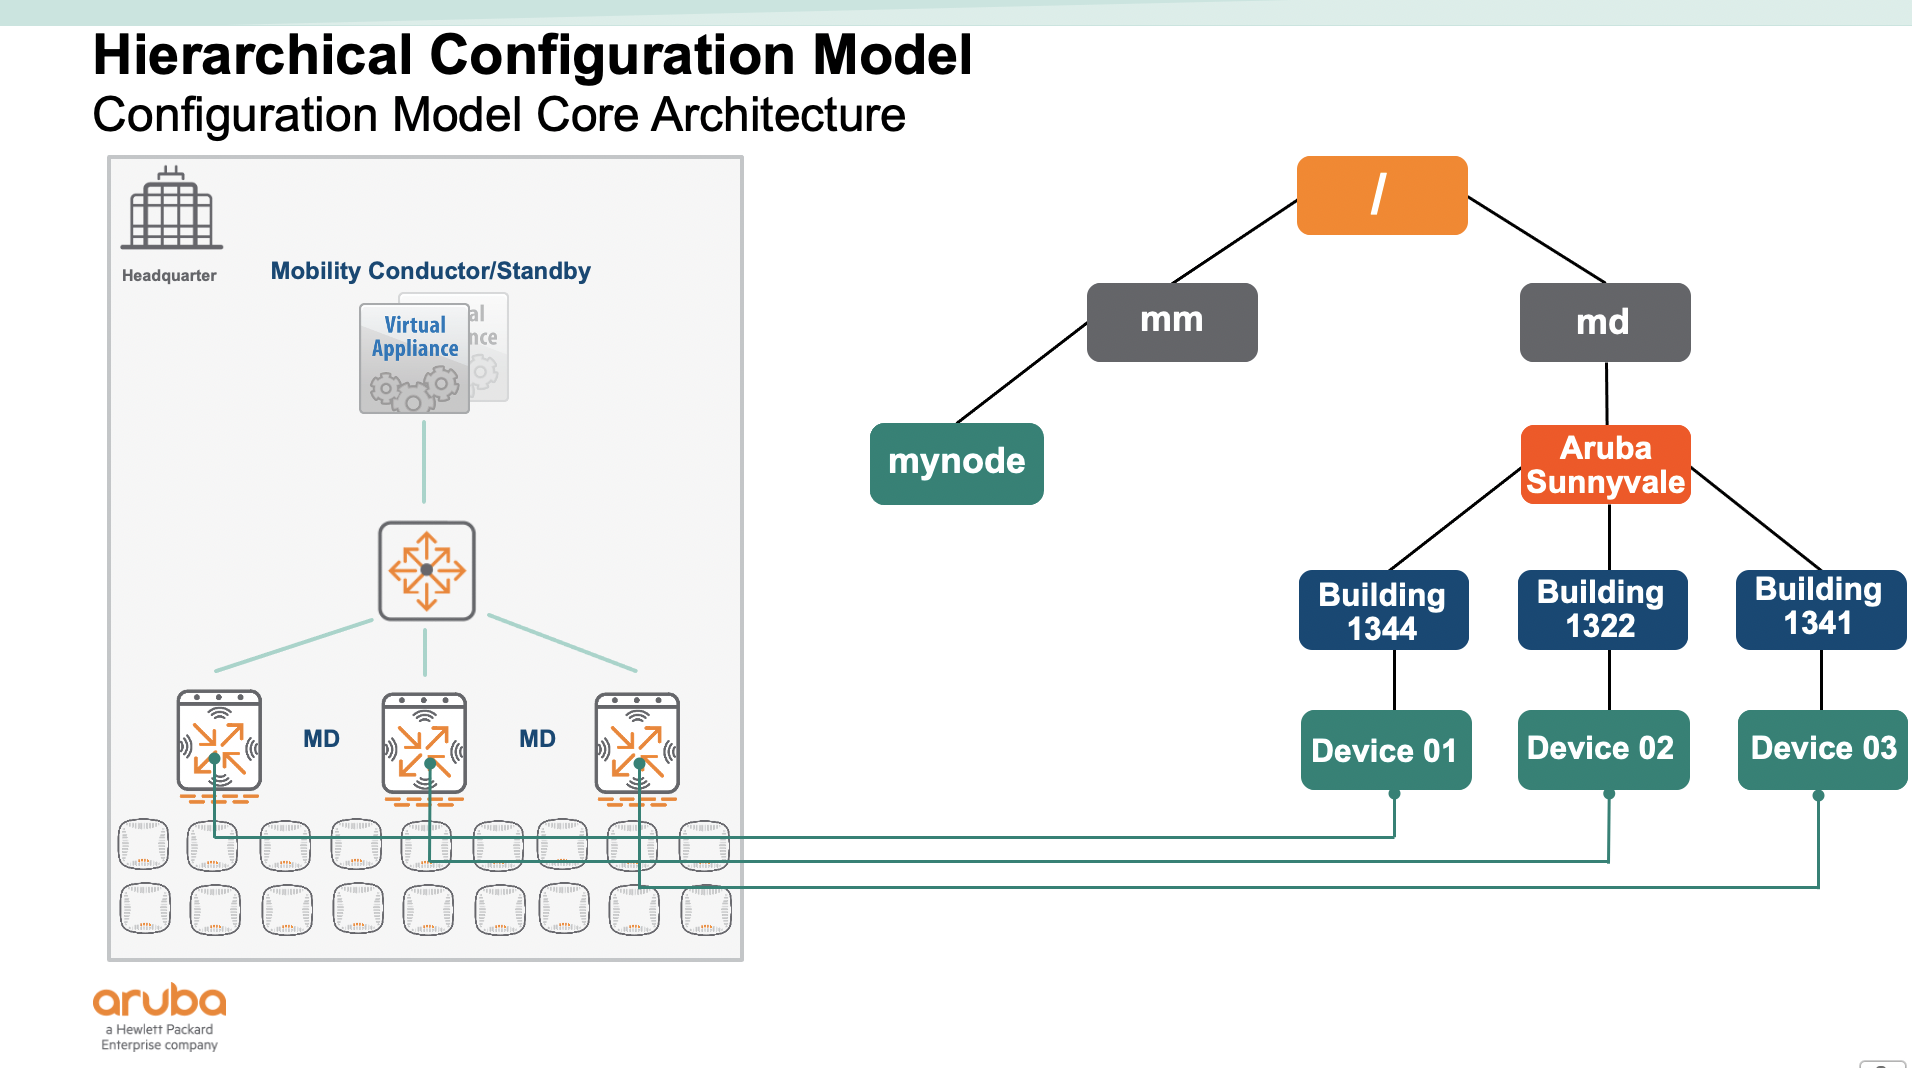 Device specific configurations reside at the device level node